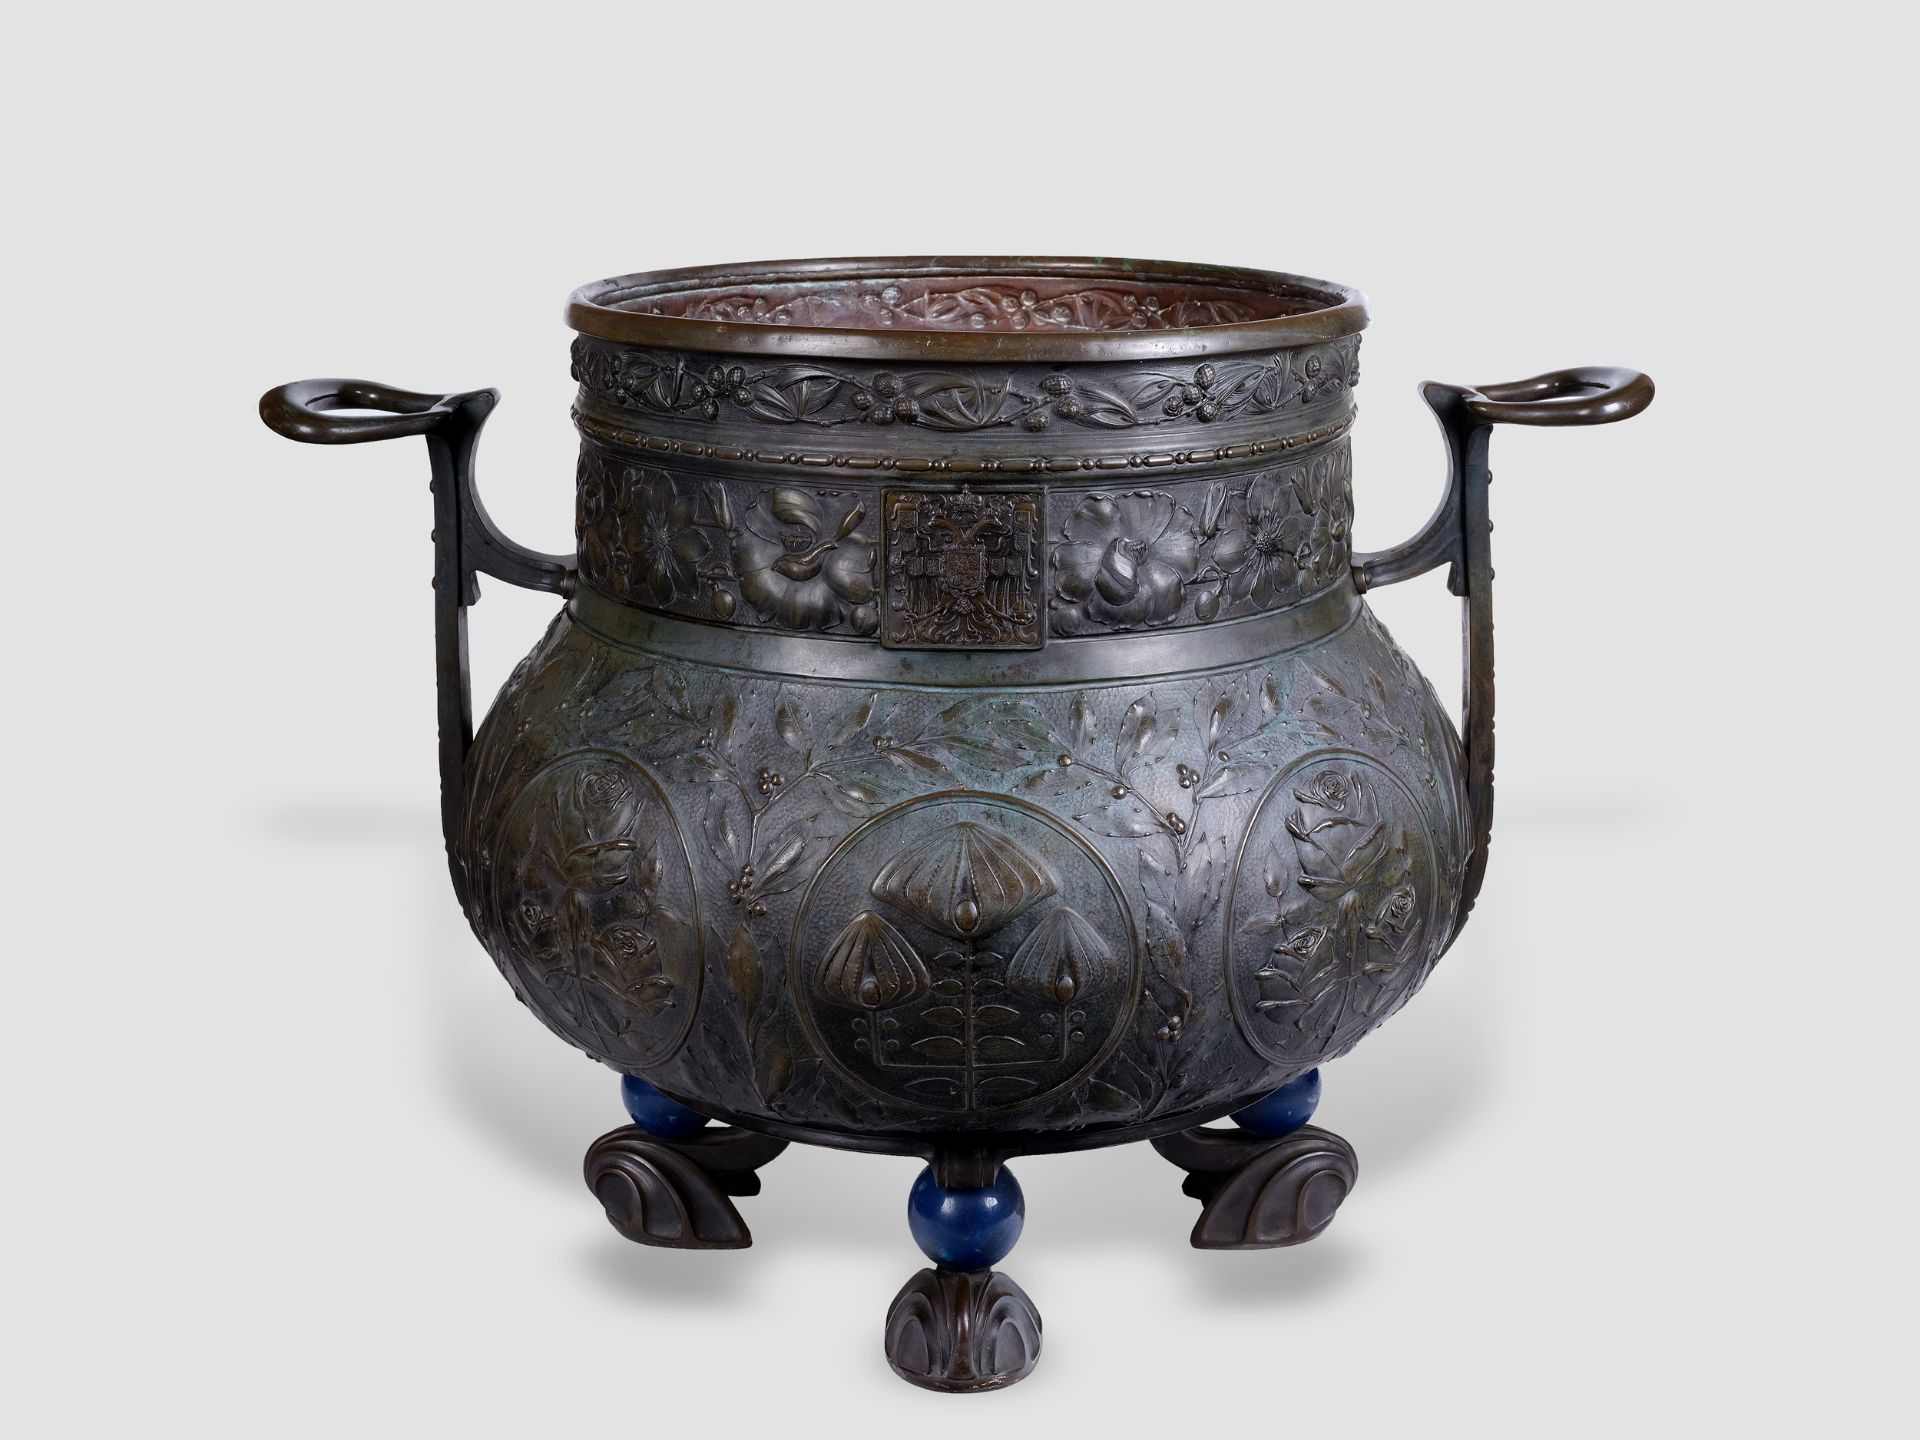 Highly important Russian planter, Modern style, Art Nuovo, Moscow around 1890/1900